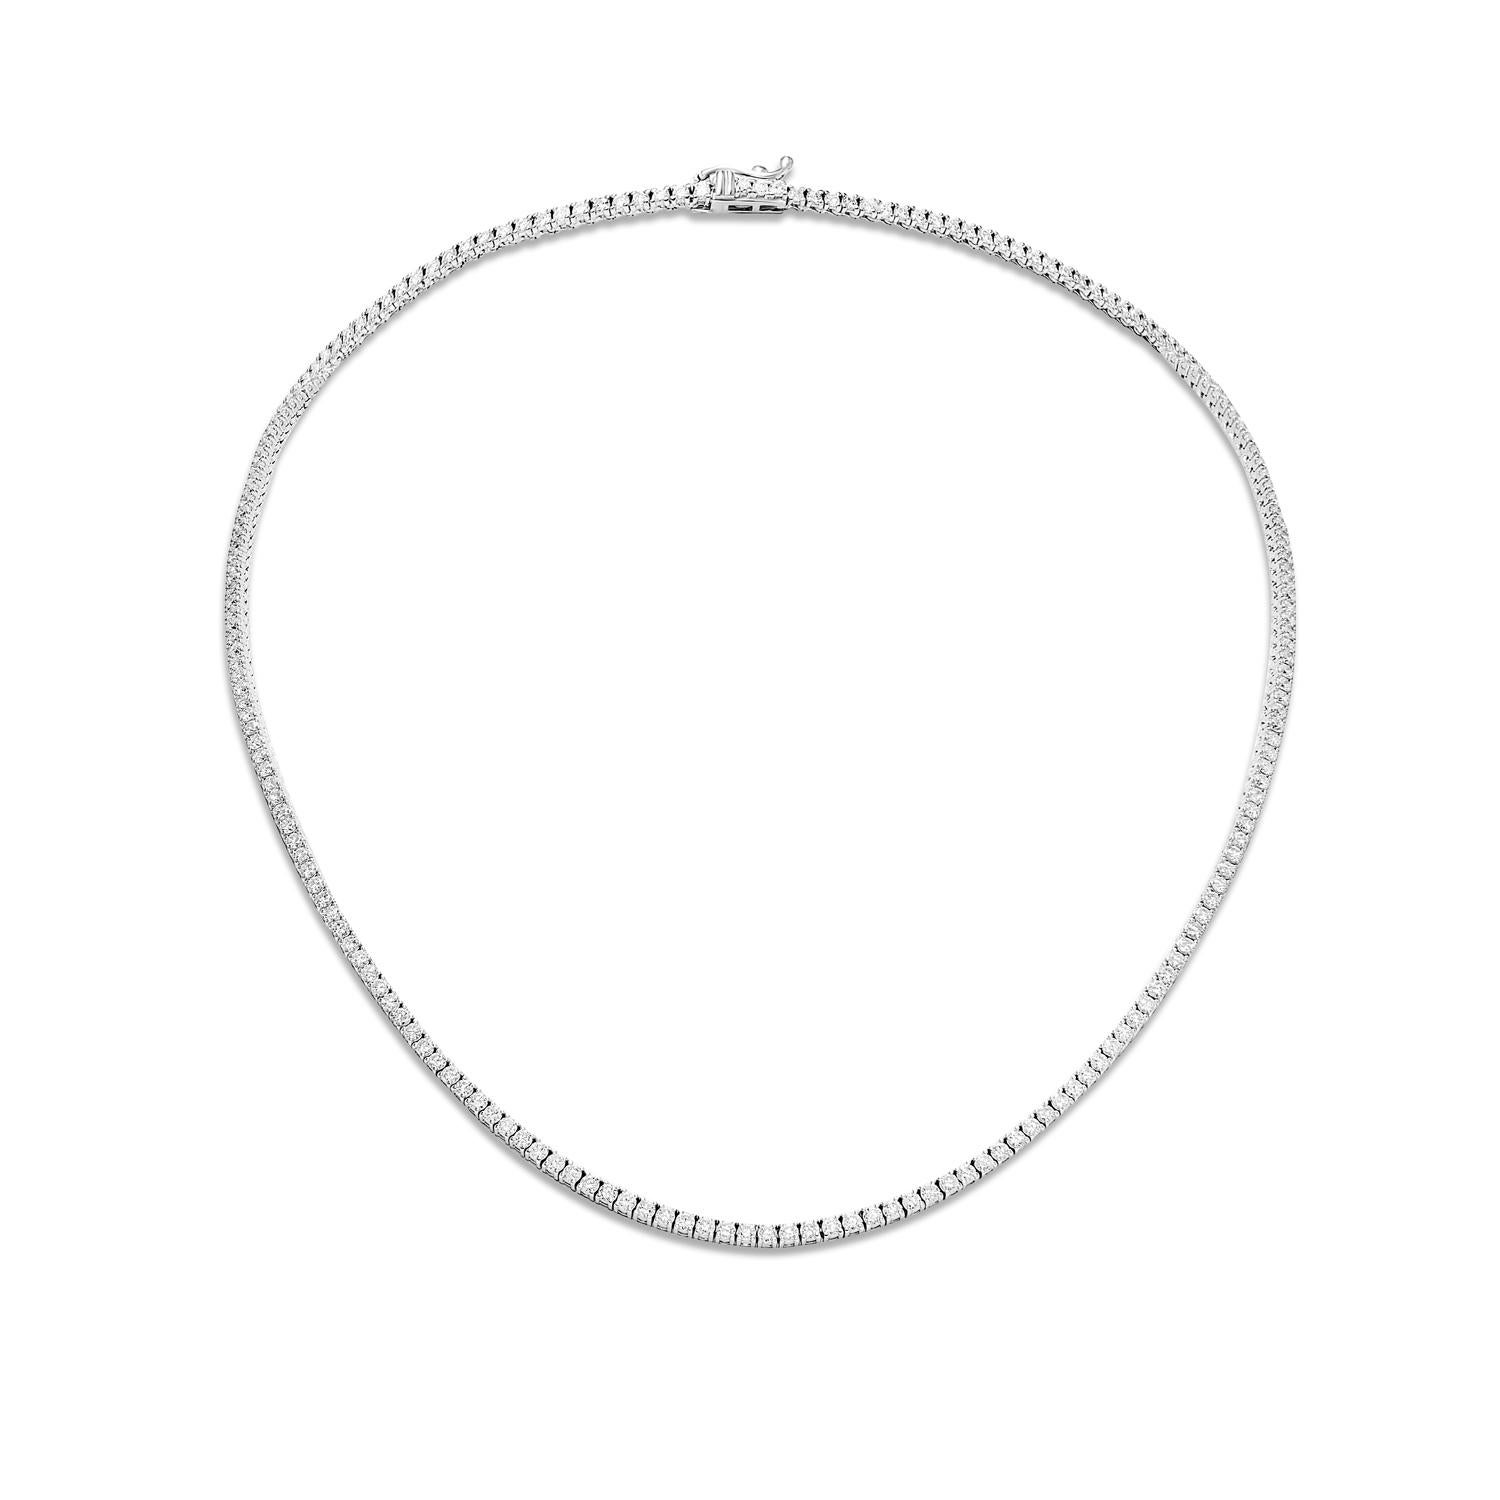 What could be more radiant than a Round Brilliant Diamond Tennis Necklace in 14 Karat White Gold For Ladies? This tennis necklace is a timeless beauty that will take her breath away. Each round diamond is hand-selected for its cut, color, and